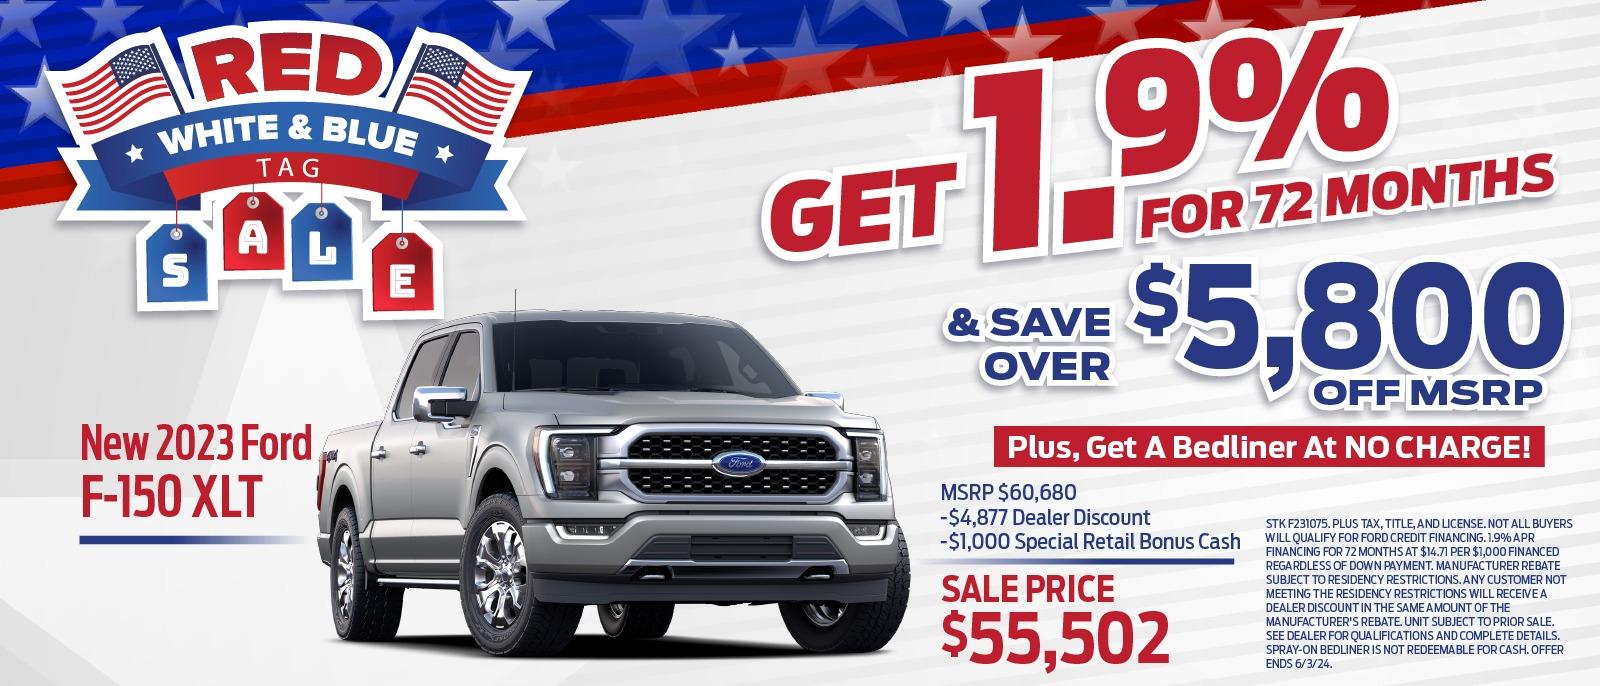 Red White & Blue Tag Sale F-150 Special!🔴⚪🔵